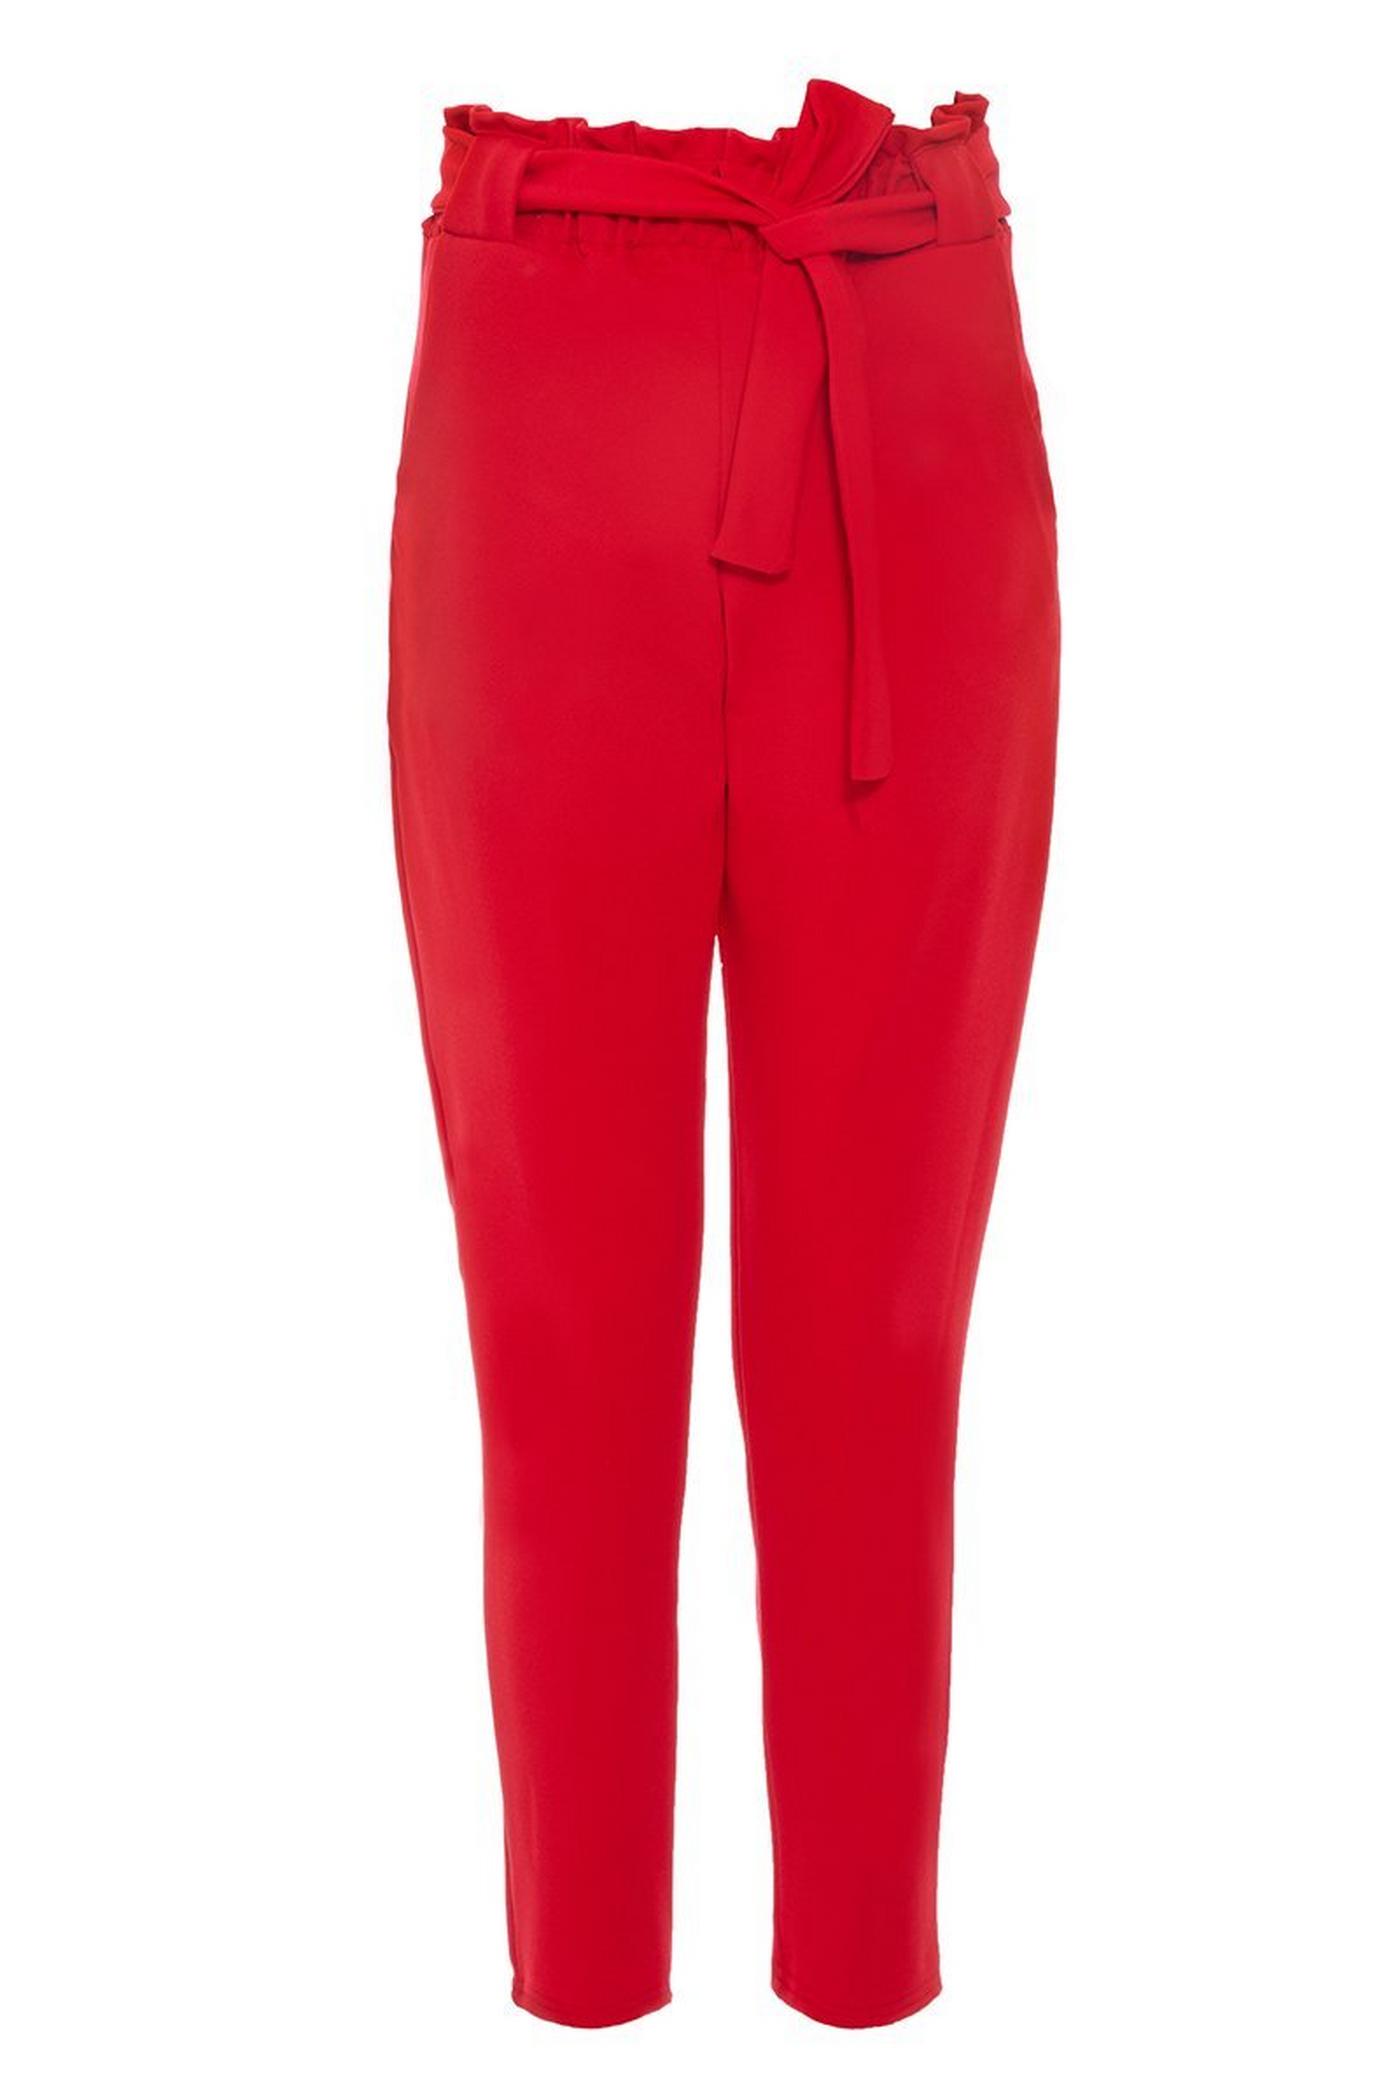 Red Crepe Paper Bag High Waist Trousers